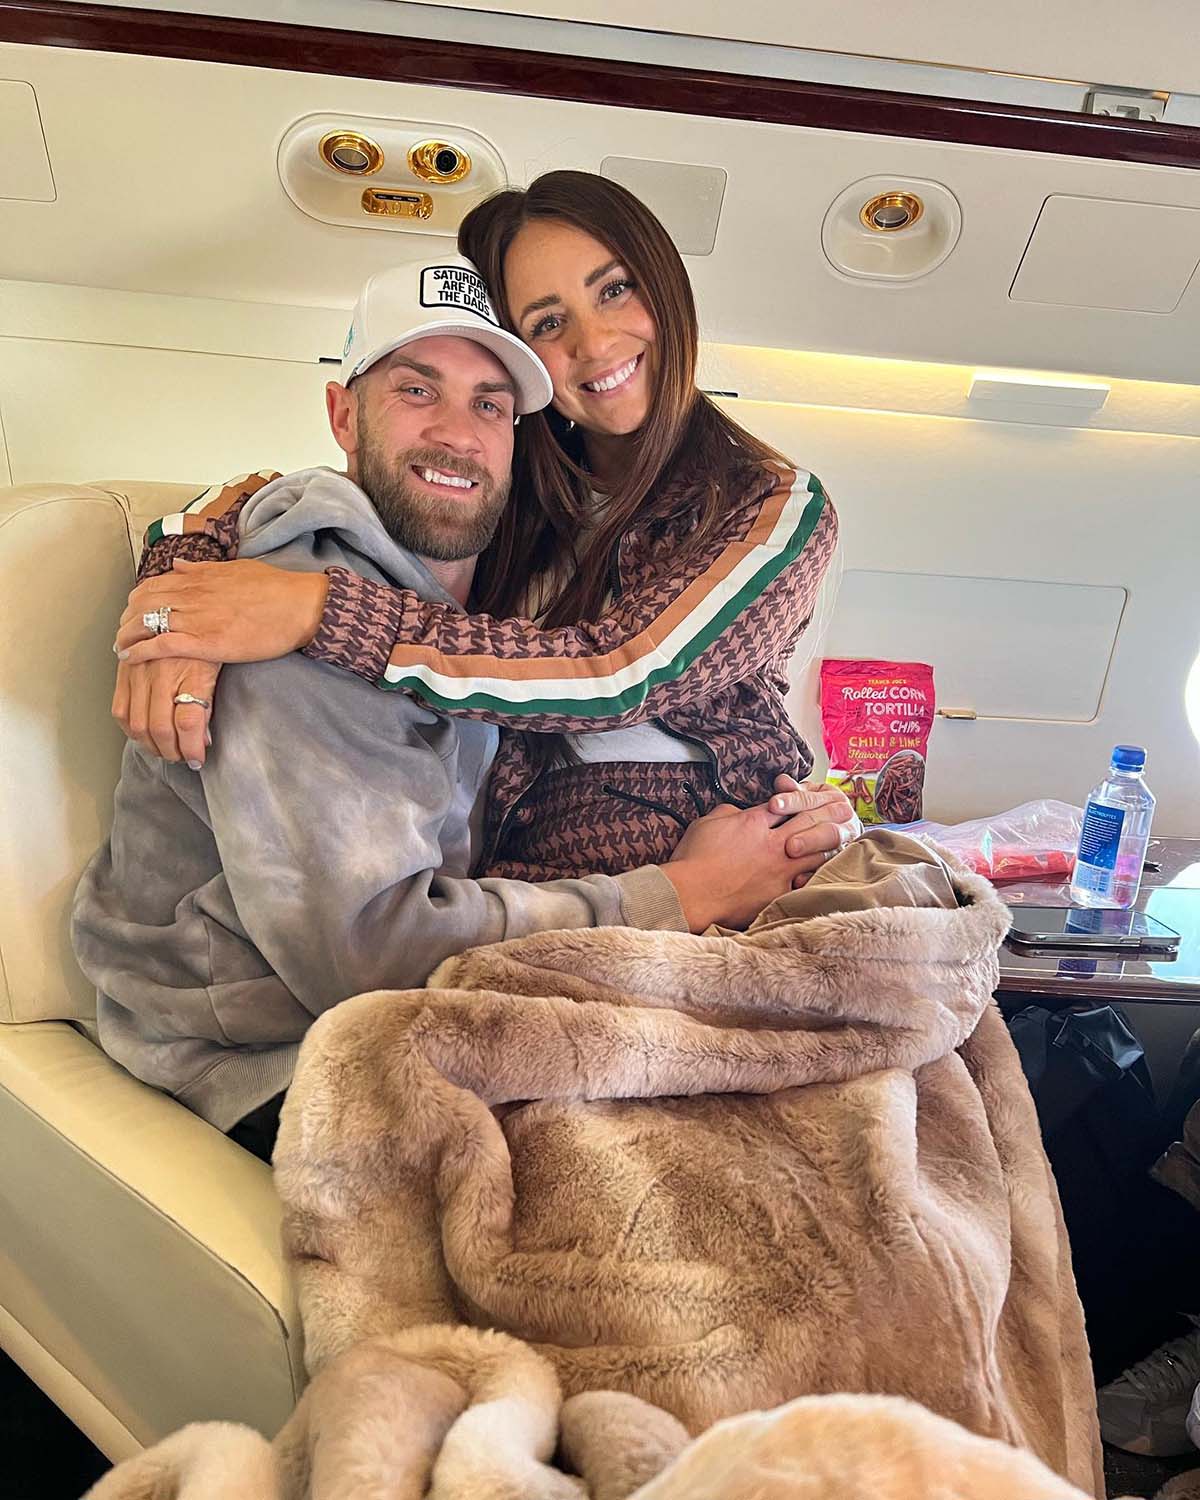 Is Bryce Harper Married? Meet the Phillies Star's Wife Kayla